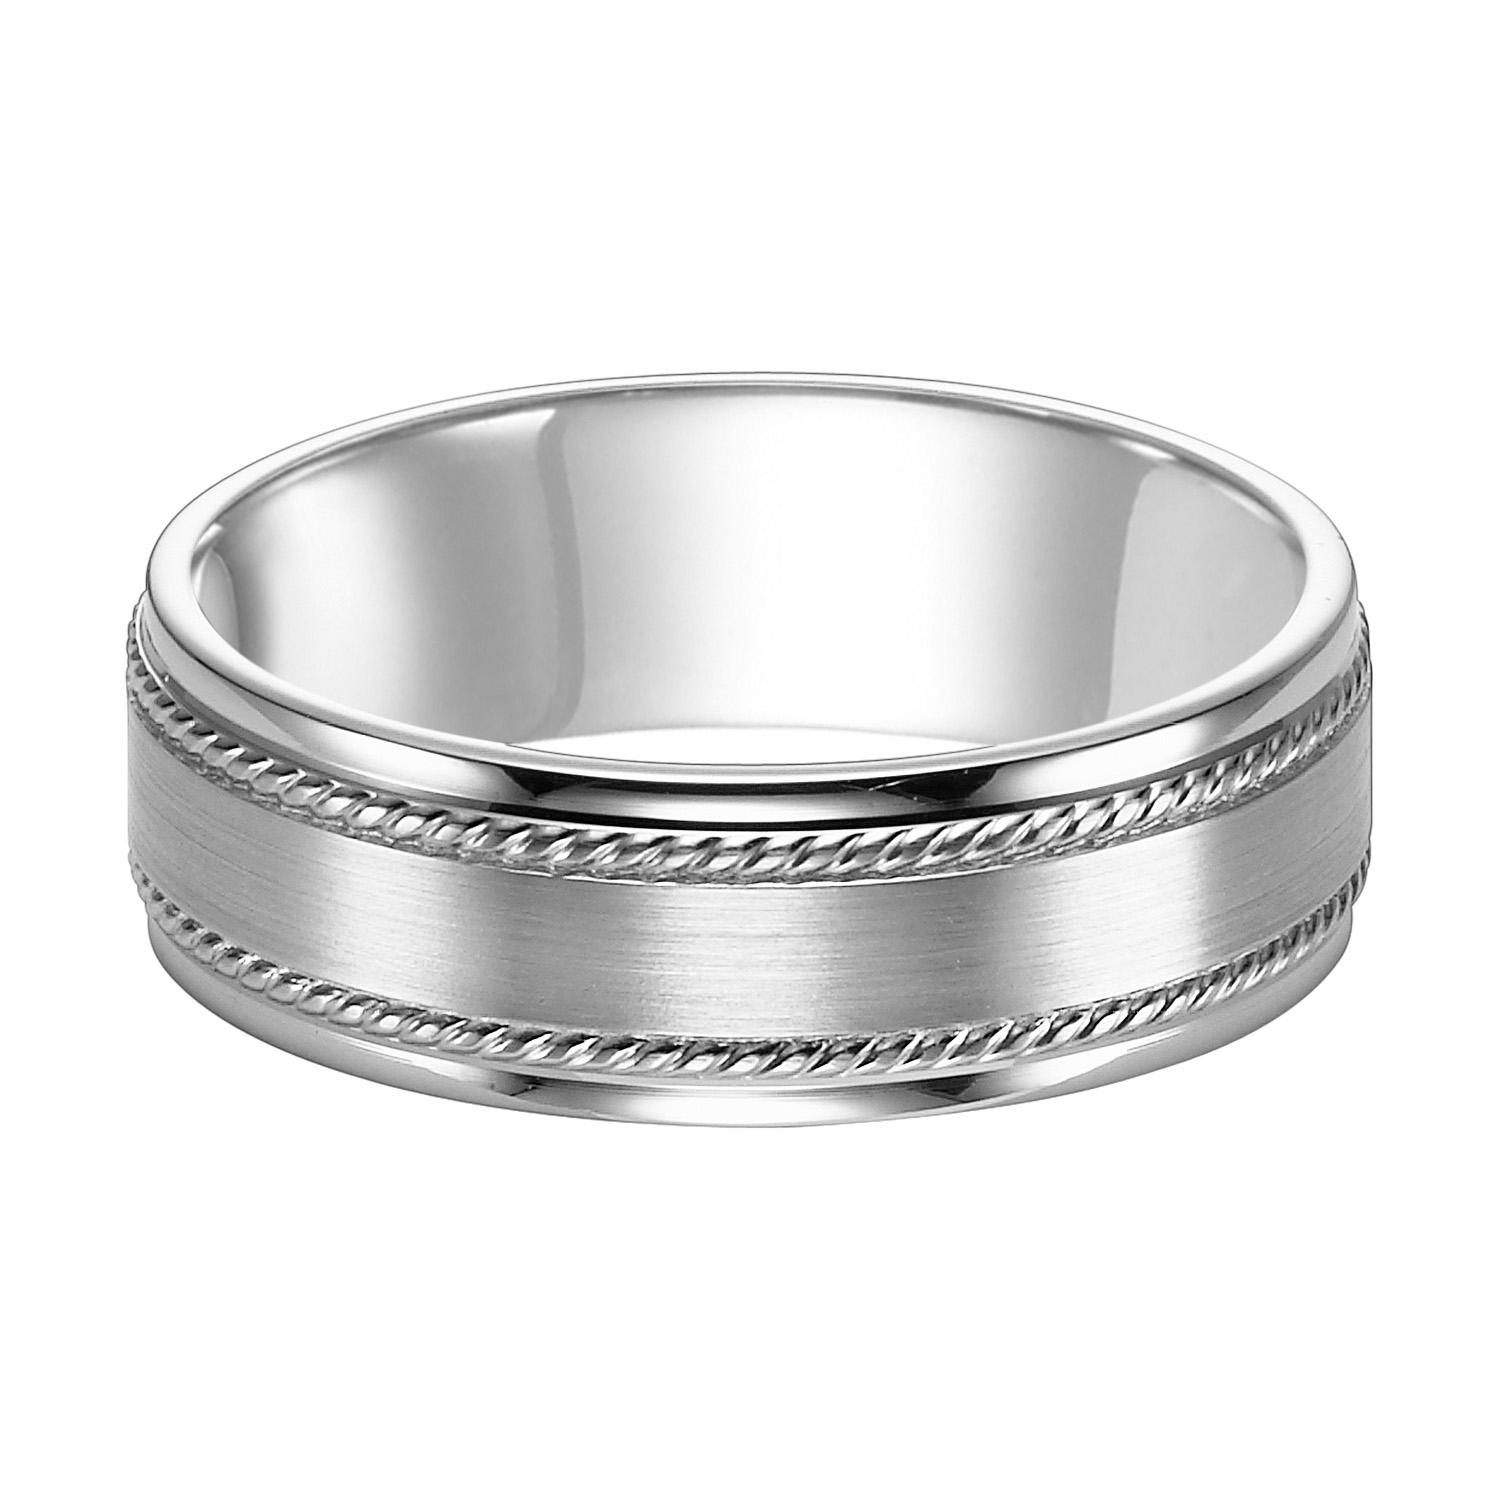 Gents 14K White Gold Wedding Band with Rope Design 0